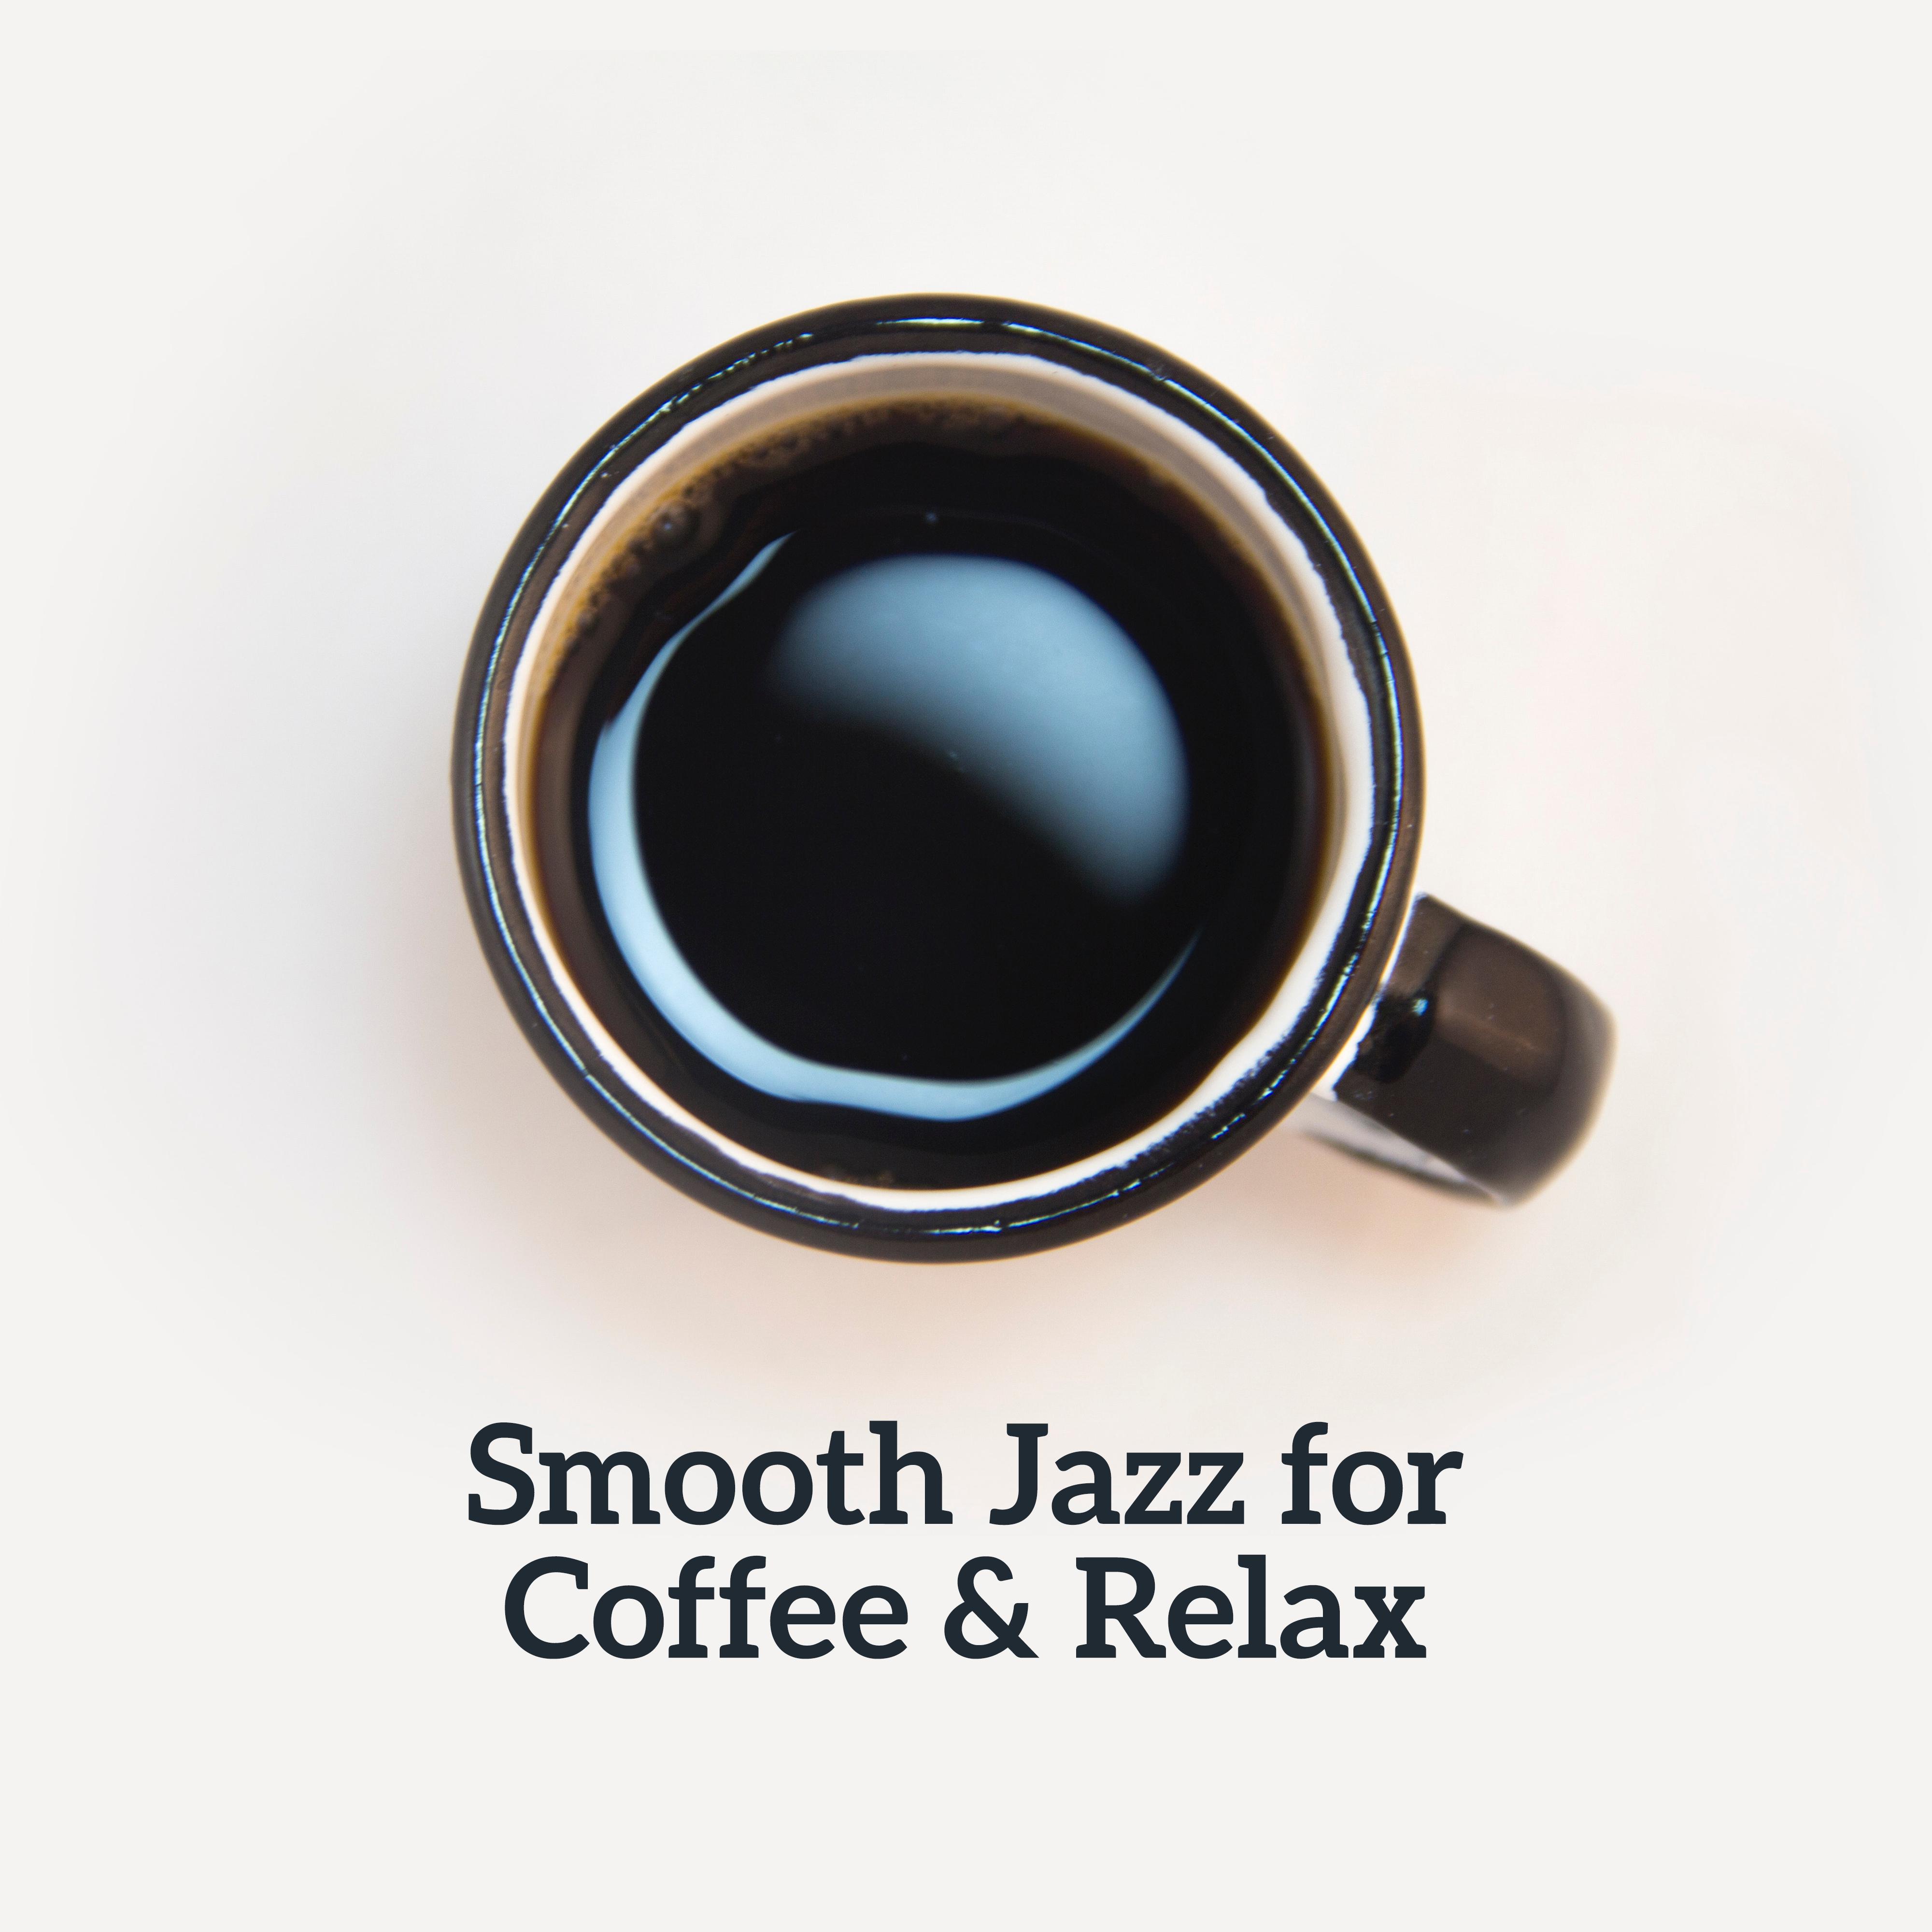 Smooth Jazz for Coffee & Relax: Jazz Lounge, Gentle Piano, Pure Relaxation, Jazz Coffee, Mellow Jazz to Rest, Jazz Music Ambient